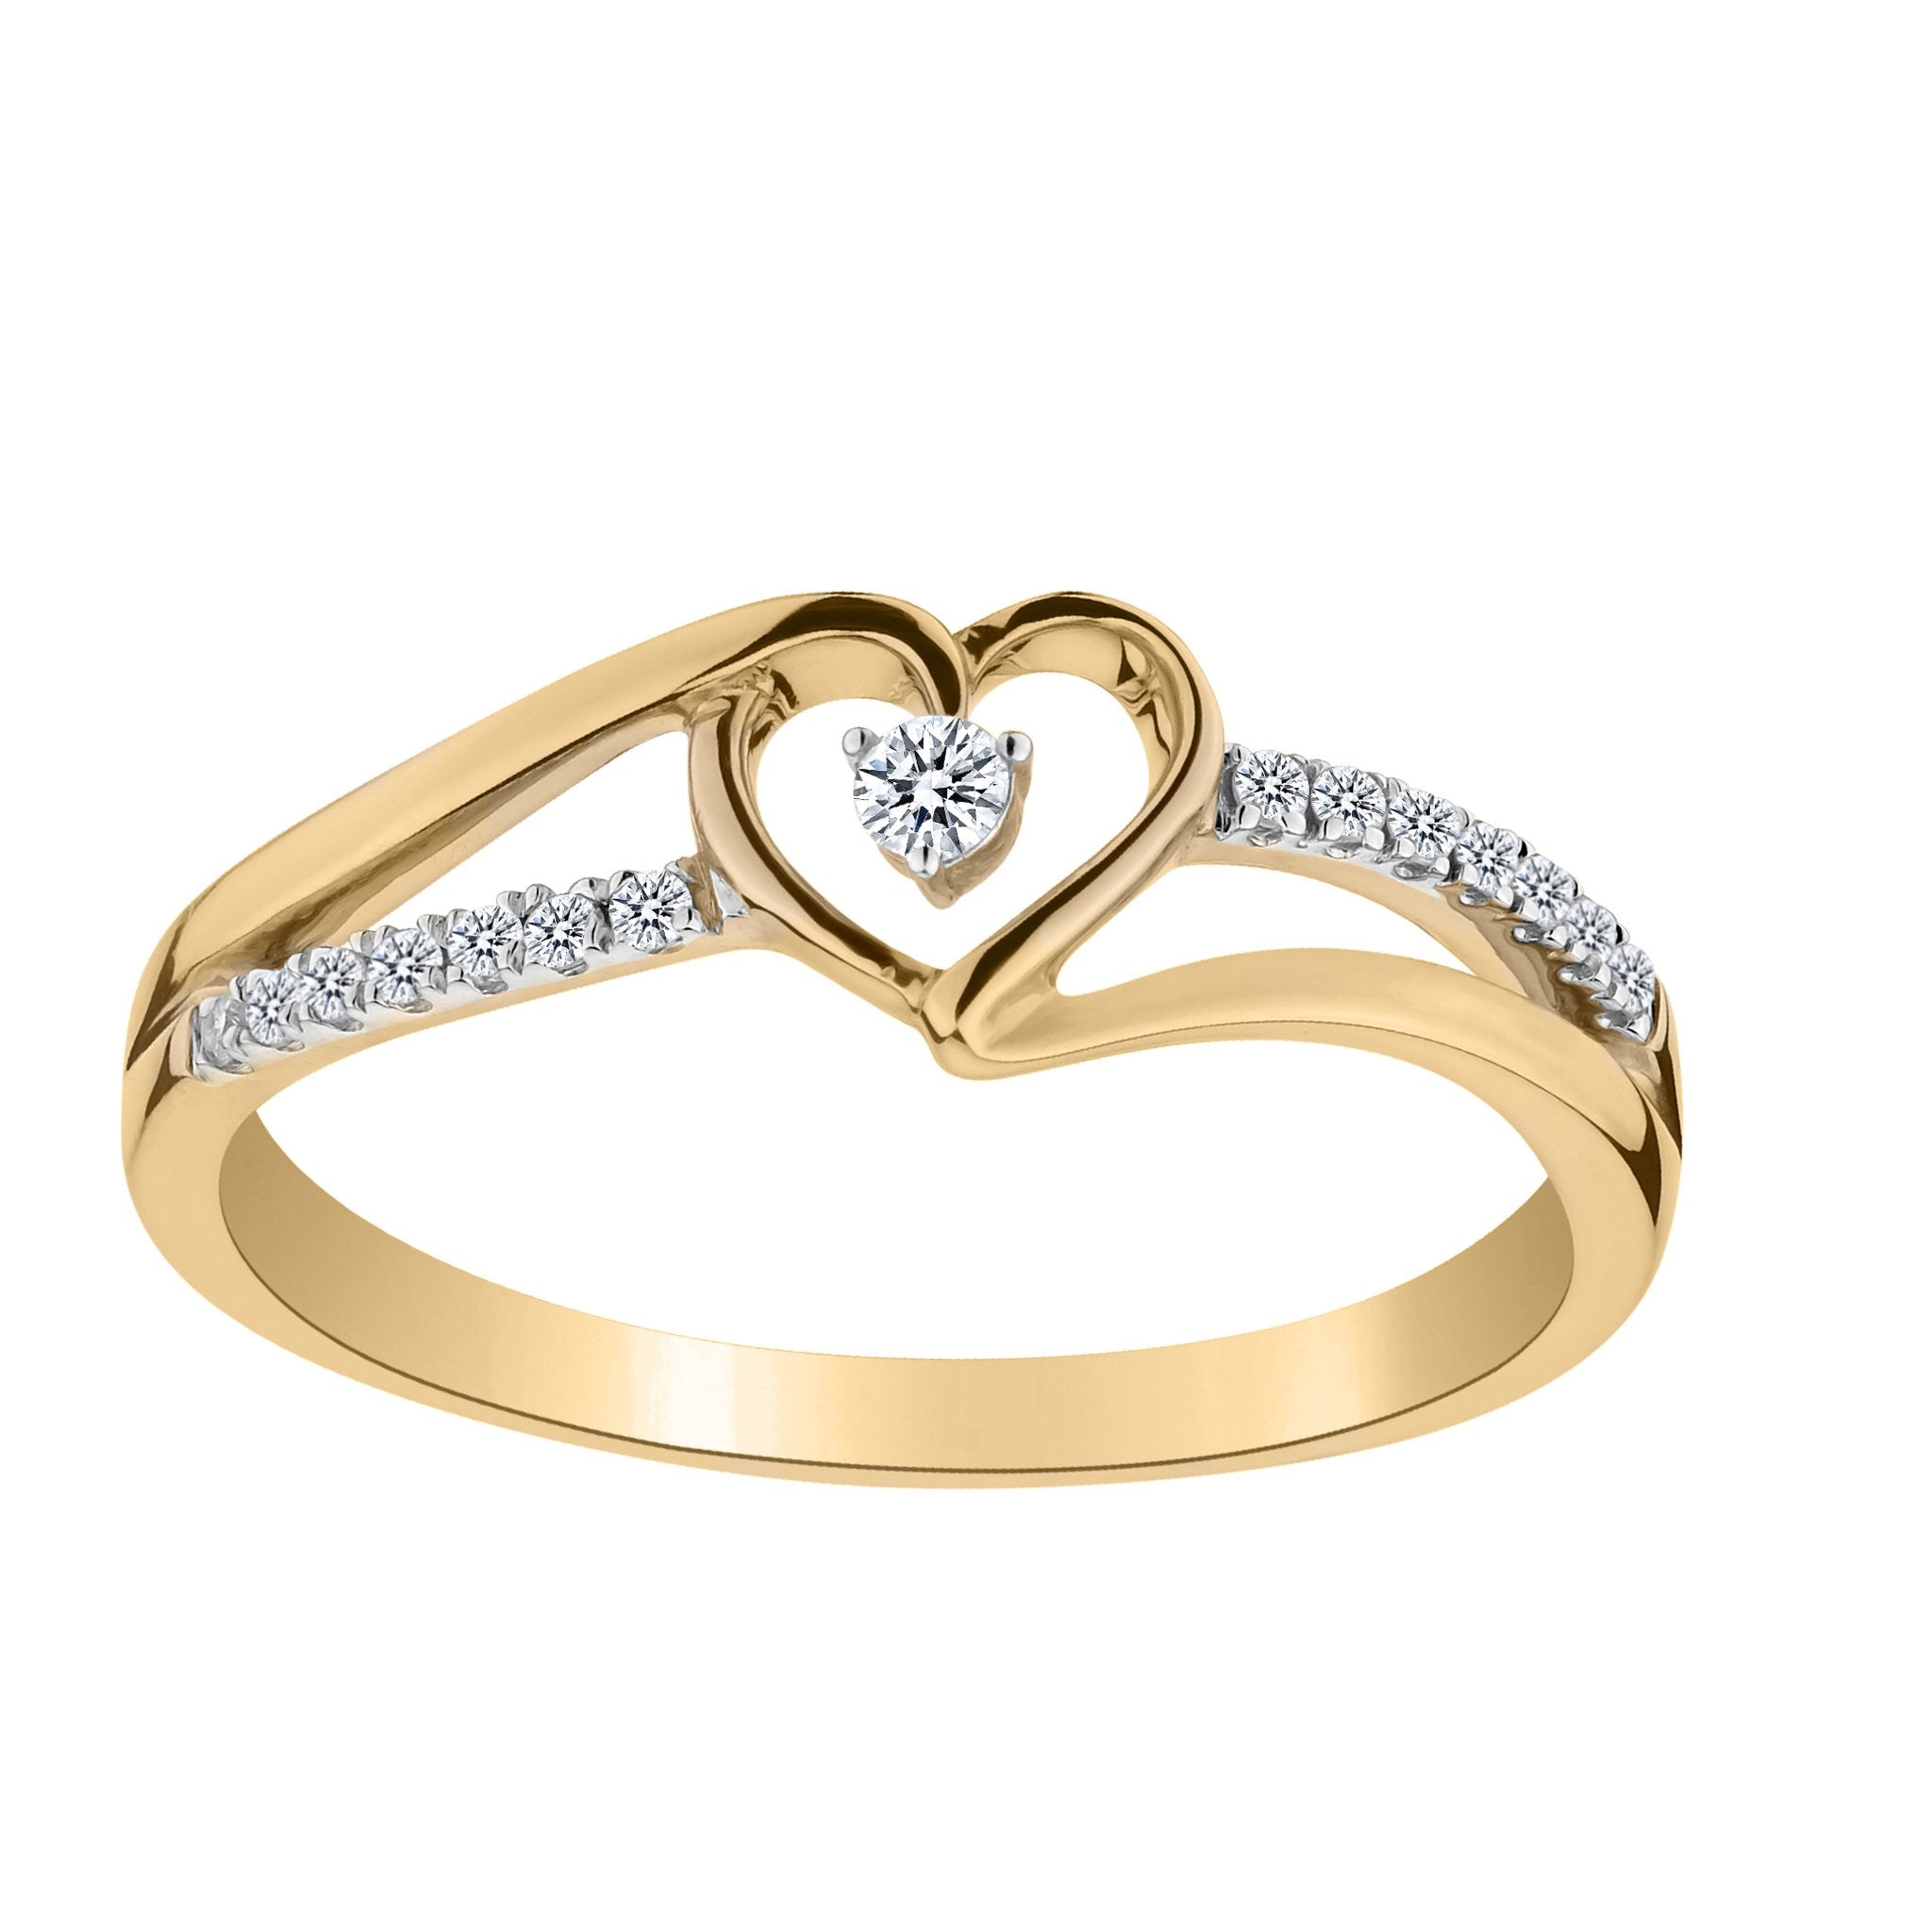 .10 CARAT DIAMOND HEARTS RING, 10kt YELLOW GOLD. Fashion Rings - Griffin Jewellery Designs